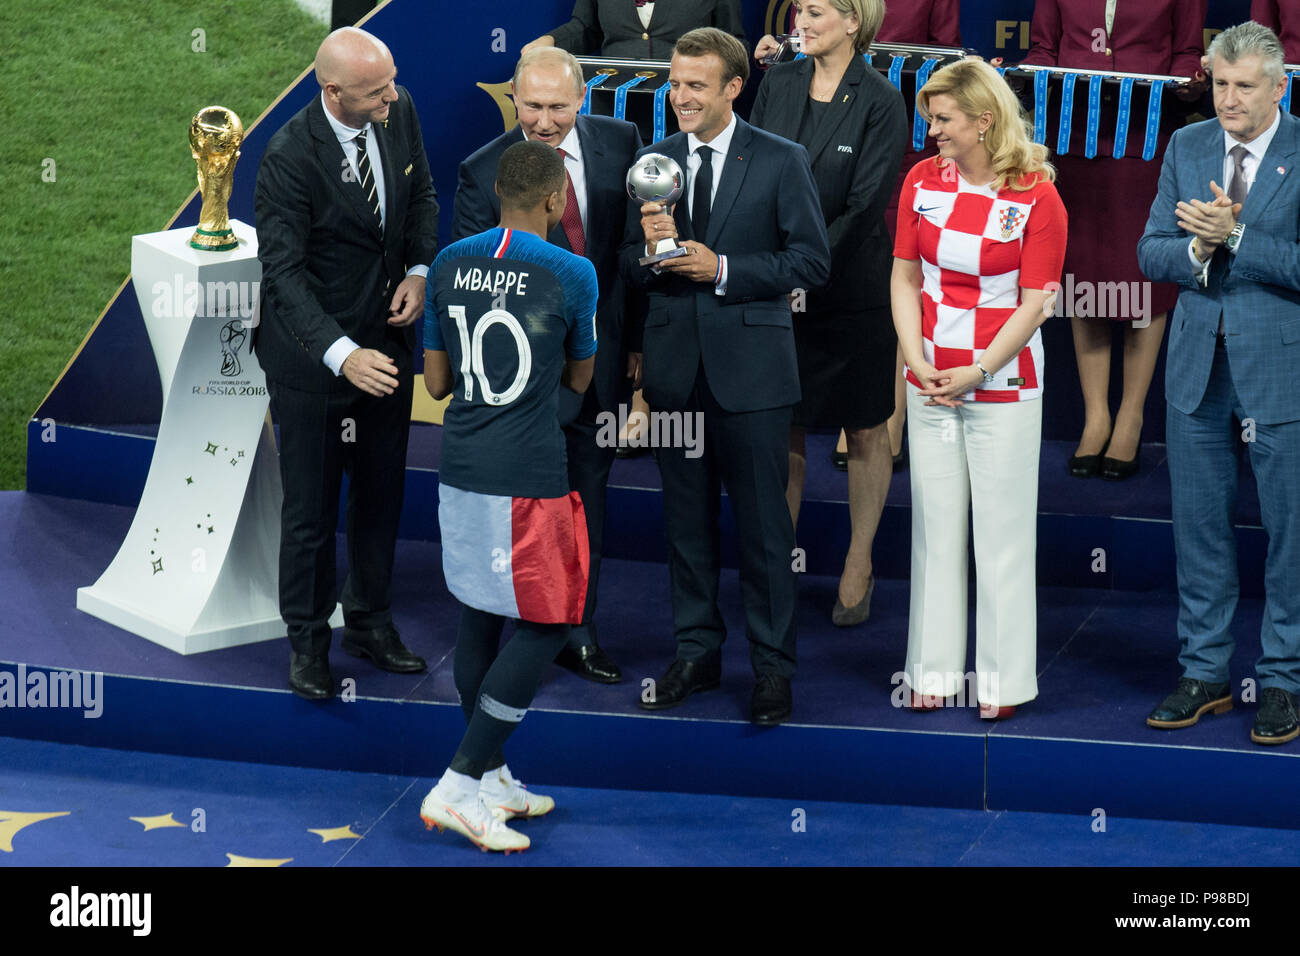 From left to right: Gianni INFANTINO (FIFA President), Vladimir PUTIN (President, RUS), Emmanuel MACRON (President, FRA), Croatia's Kolinda GRABAR-KITAROVIC (President, CRO), Kylian MBAPPE (FRA) receives the trophy for best youngster, award ceremony, whole FIGURE, FIFA Young Player Award, France (FRA) - Croatia (CRO) 4-2, Final, Game 64, on Jul 15, 1818 in Moscow; Football World Cup 2018 in Russia from 14.06. - 15.07.2018. | Usage worldwide Stock Photo